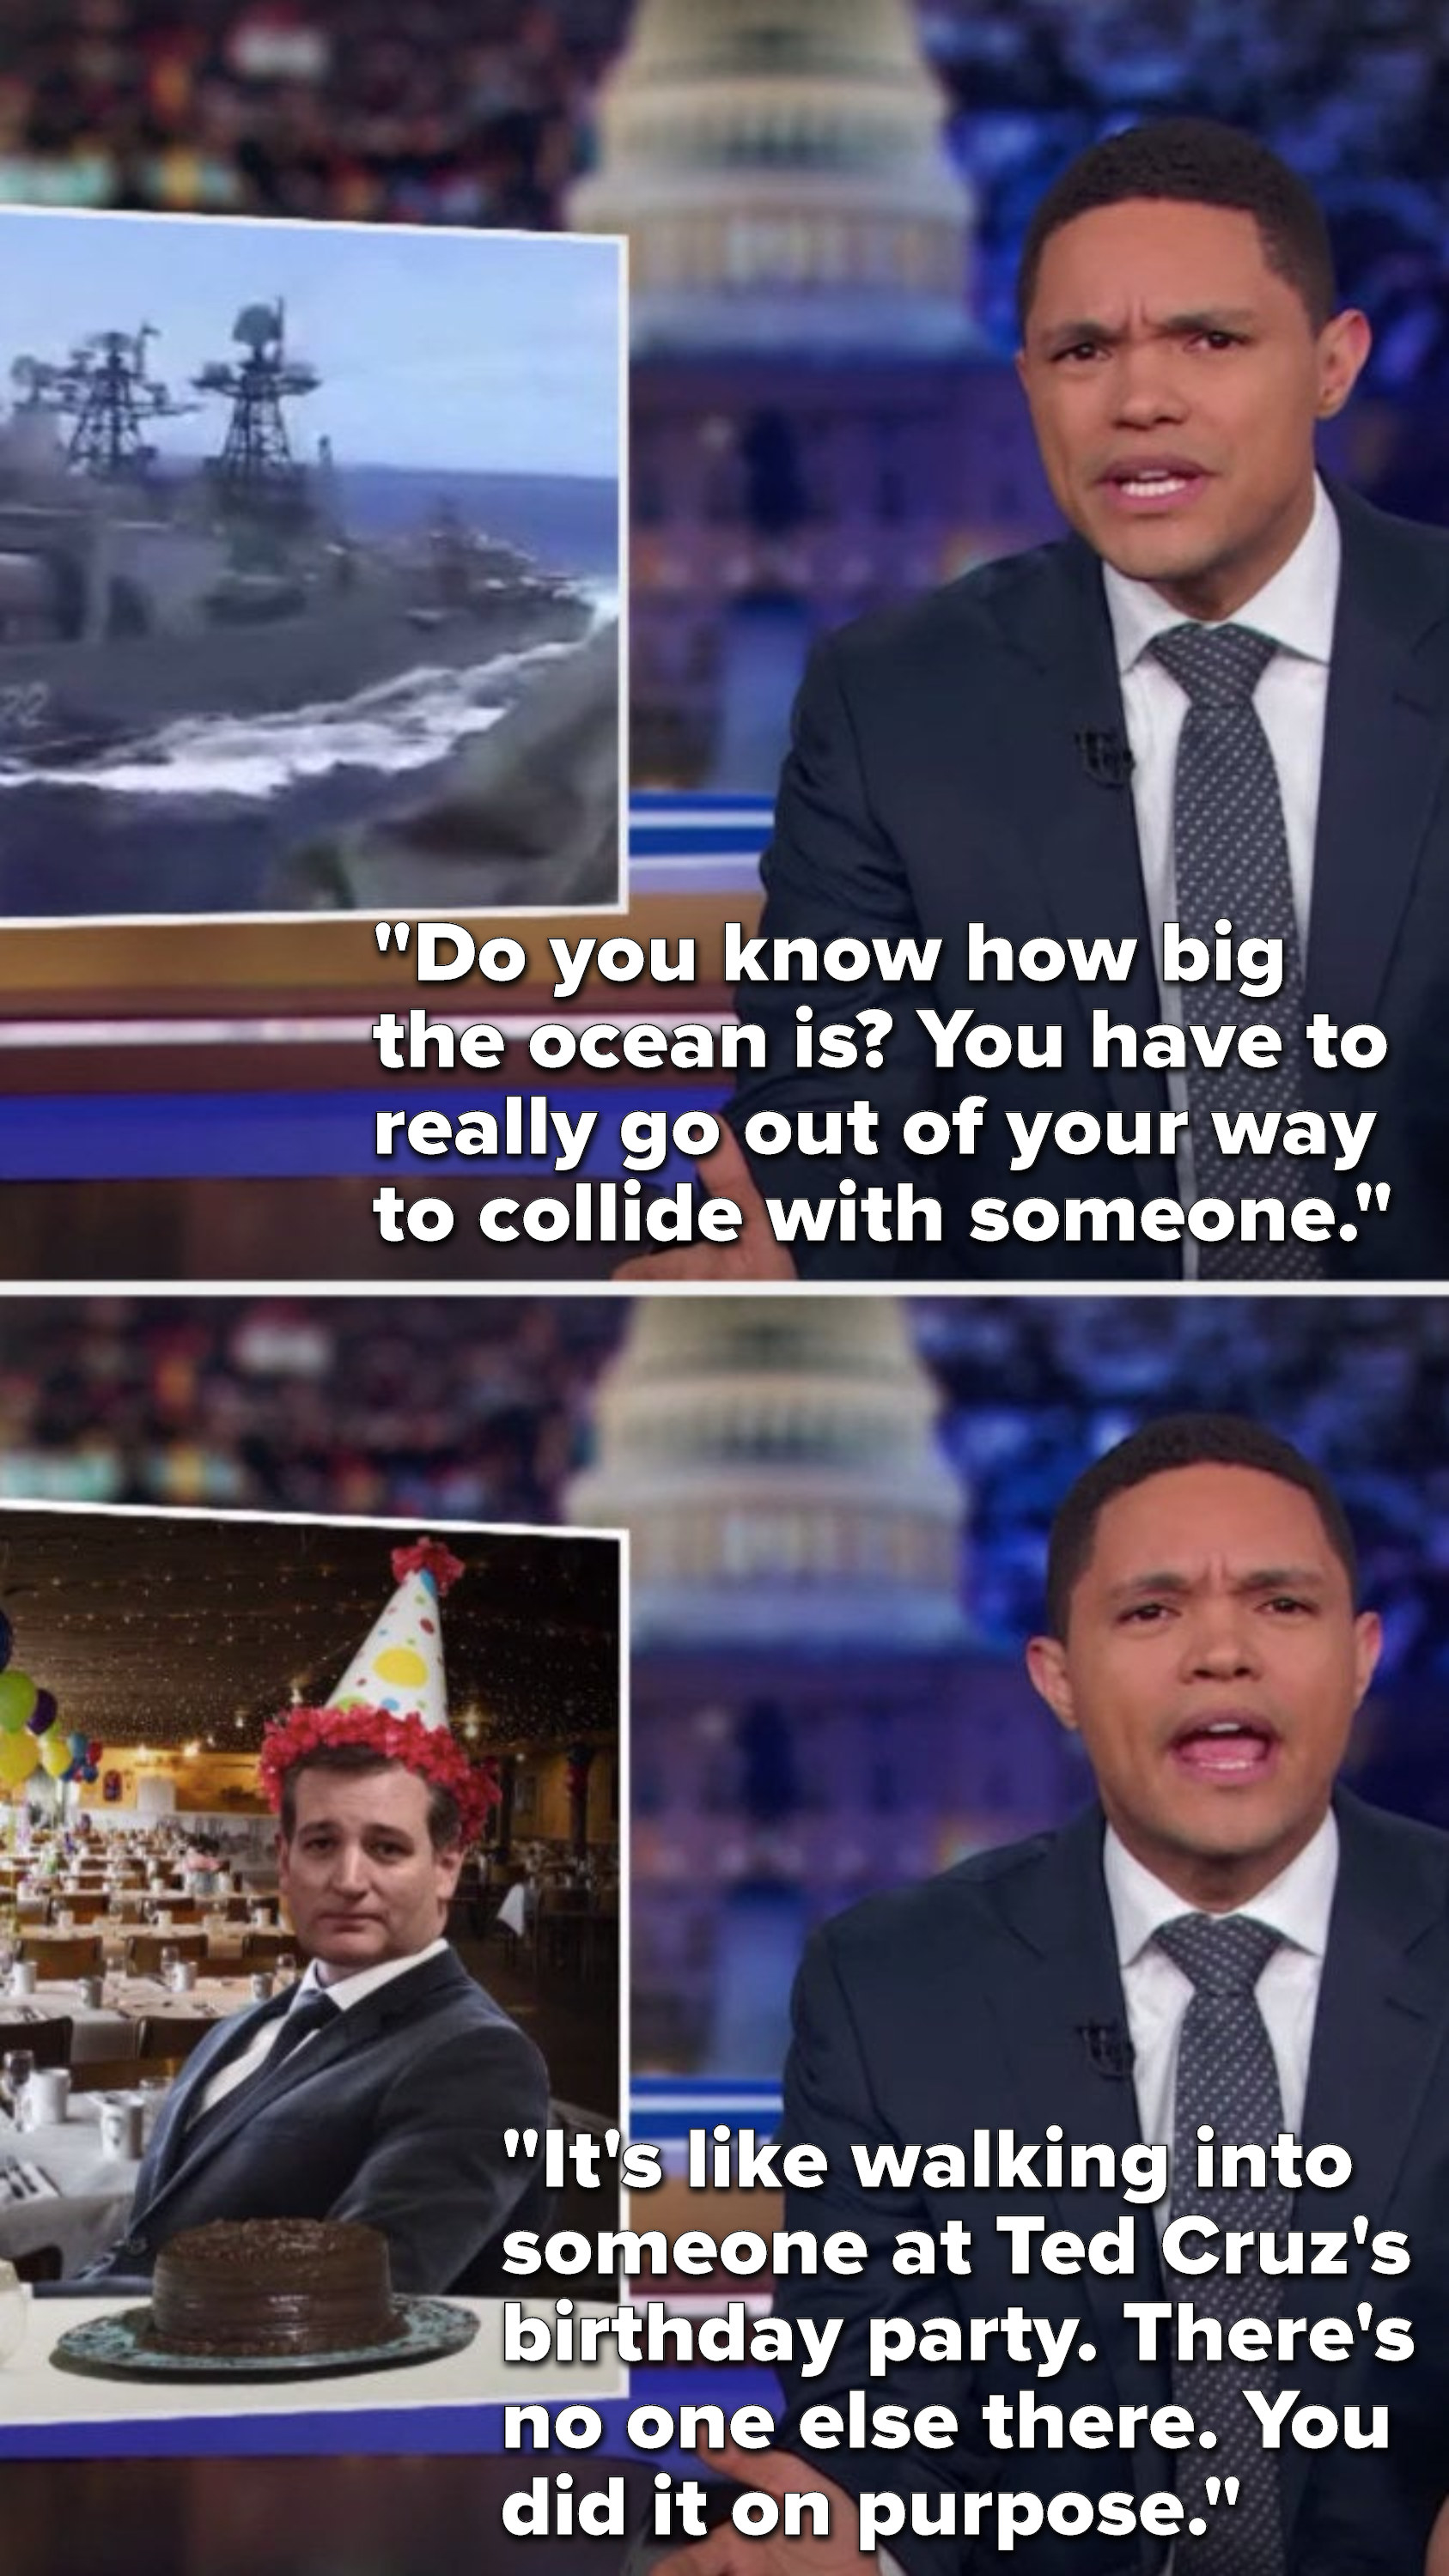 Noah says, &quot;Do you know how big the ocean is, you have to really go out of your way to collide with someone, it&#x27;s like walking into someone at Ted Cruz&#x27;s birthday party, there&#x27;s no one else there, you did it on purpose&quot;